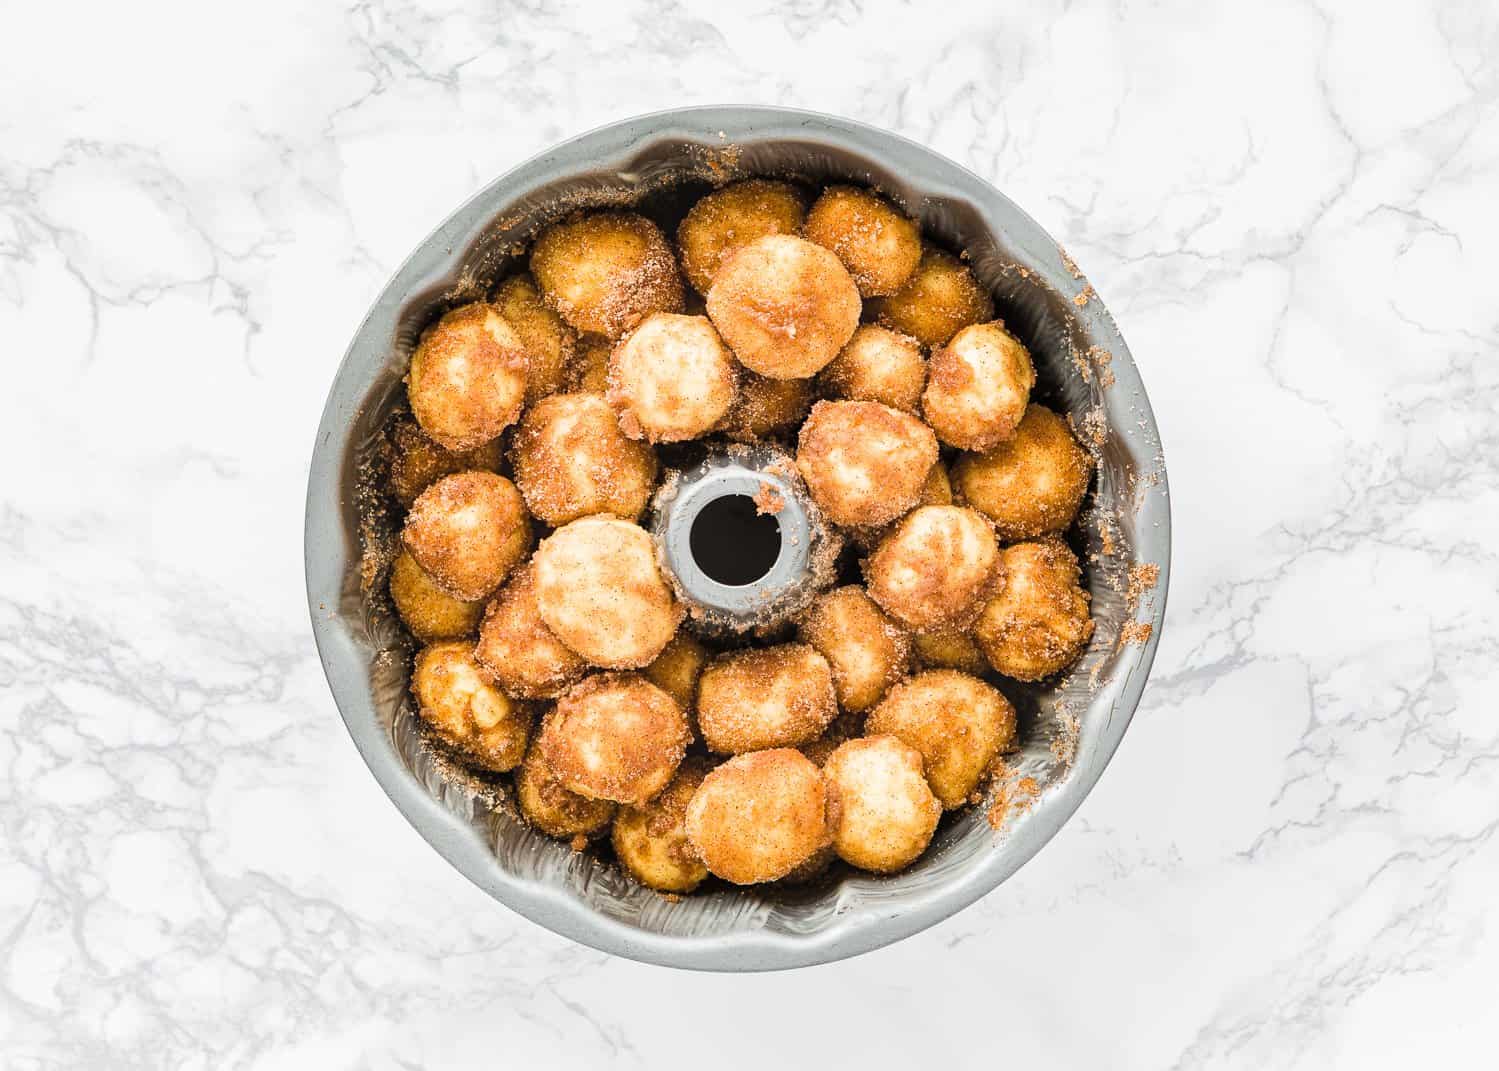 Egg-free monkey bread dough balls coated with melted butter and cinnamon sugar in a bundt cake pan. 